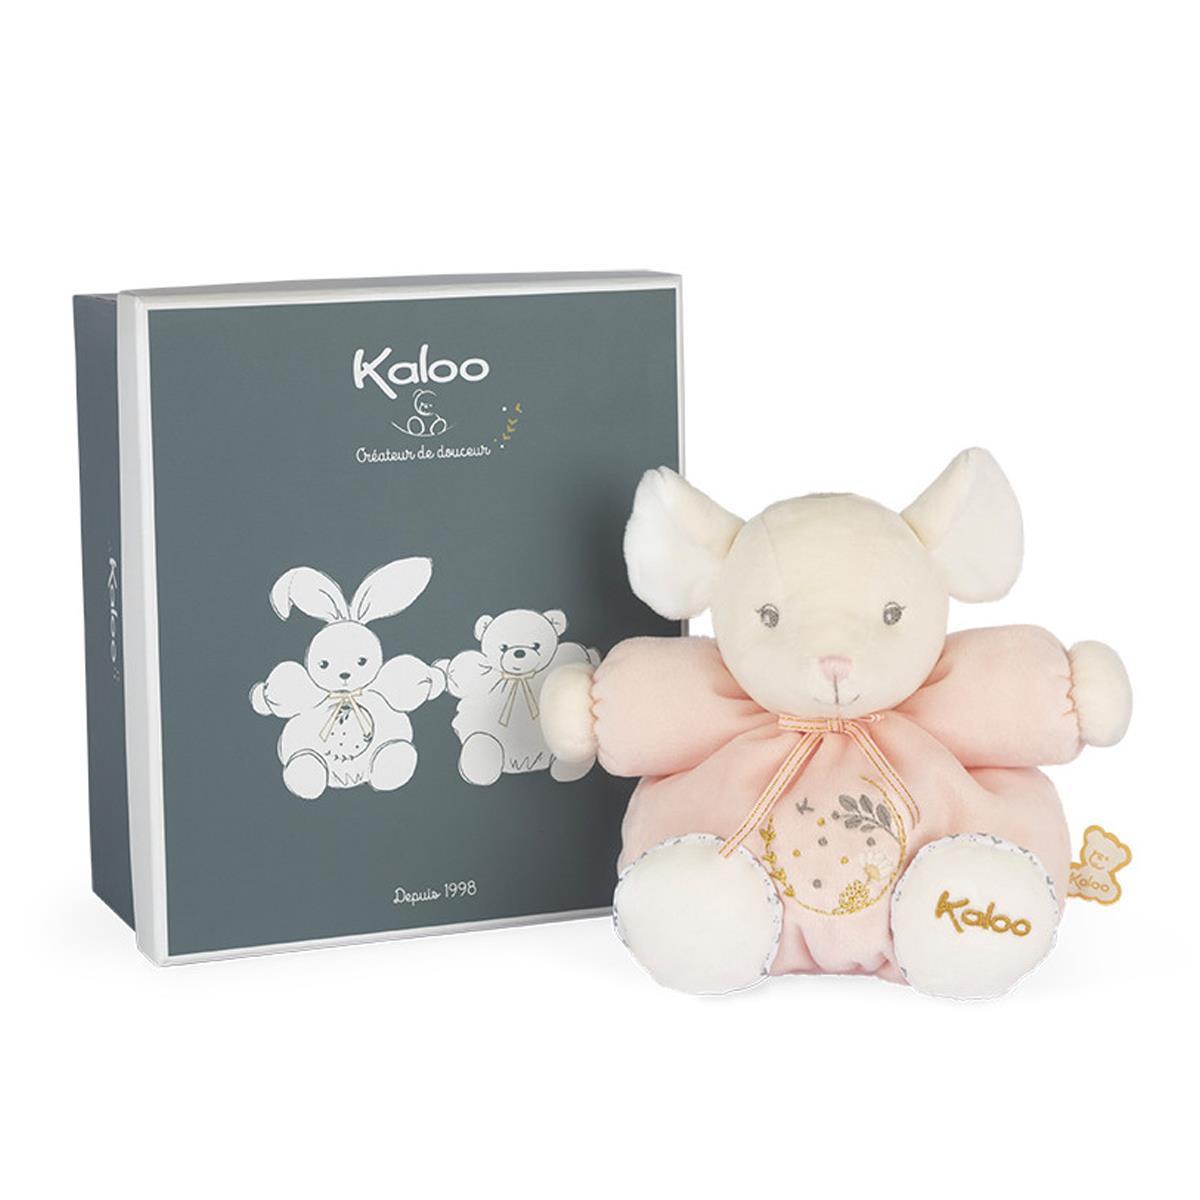 Kaloo Perle Chubby Mouse Small Pink Soft Toy - 18 cm